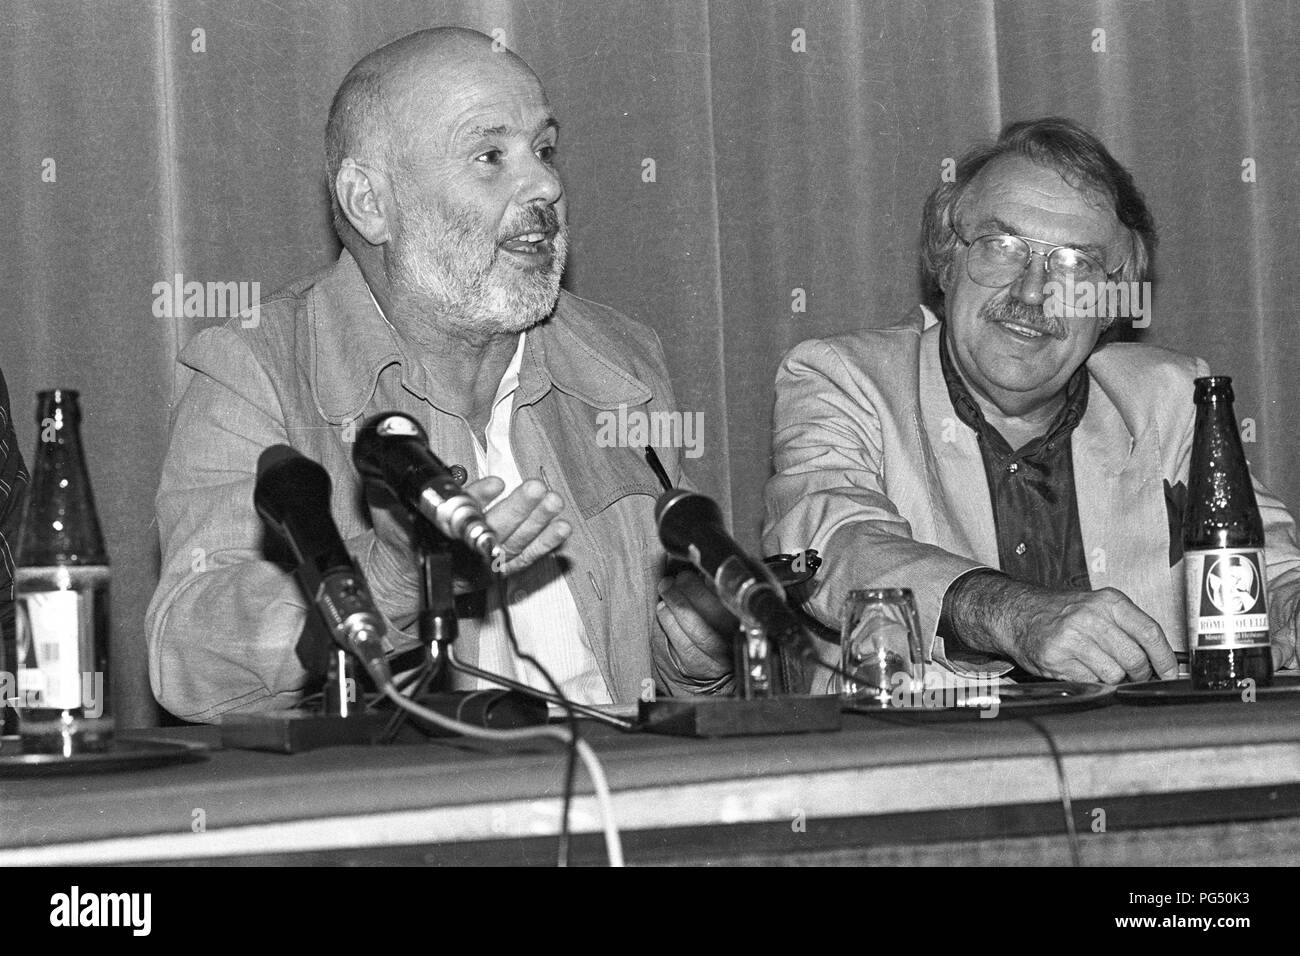 The Hungarian writer Istvan Eorsi gives a press conference at a meeting of the Oesterreichische Gesellschaft fuer Literatur (Austrian Literature Society) in Vienna in 1990. Right in the picture, the writer Pavel Kohout. Stock Photo